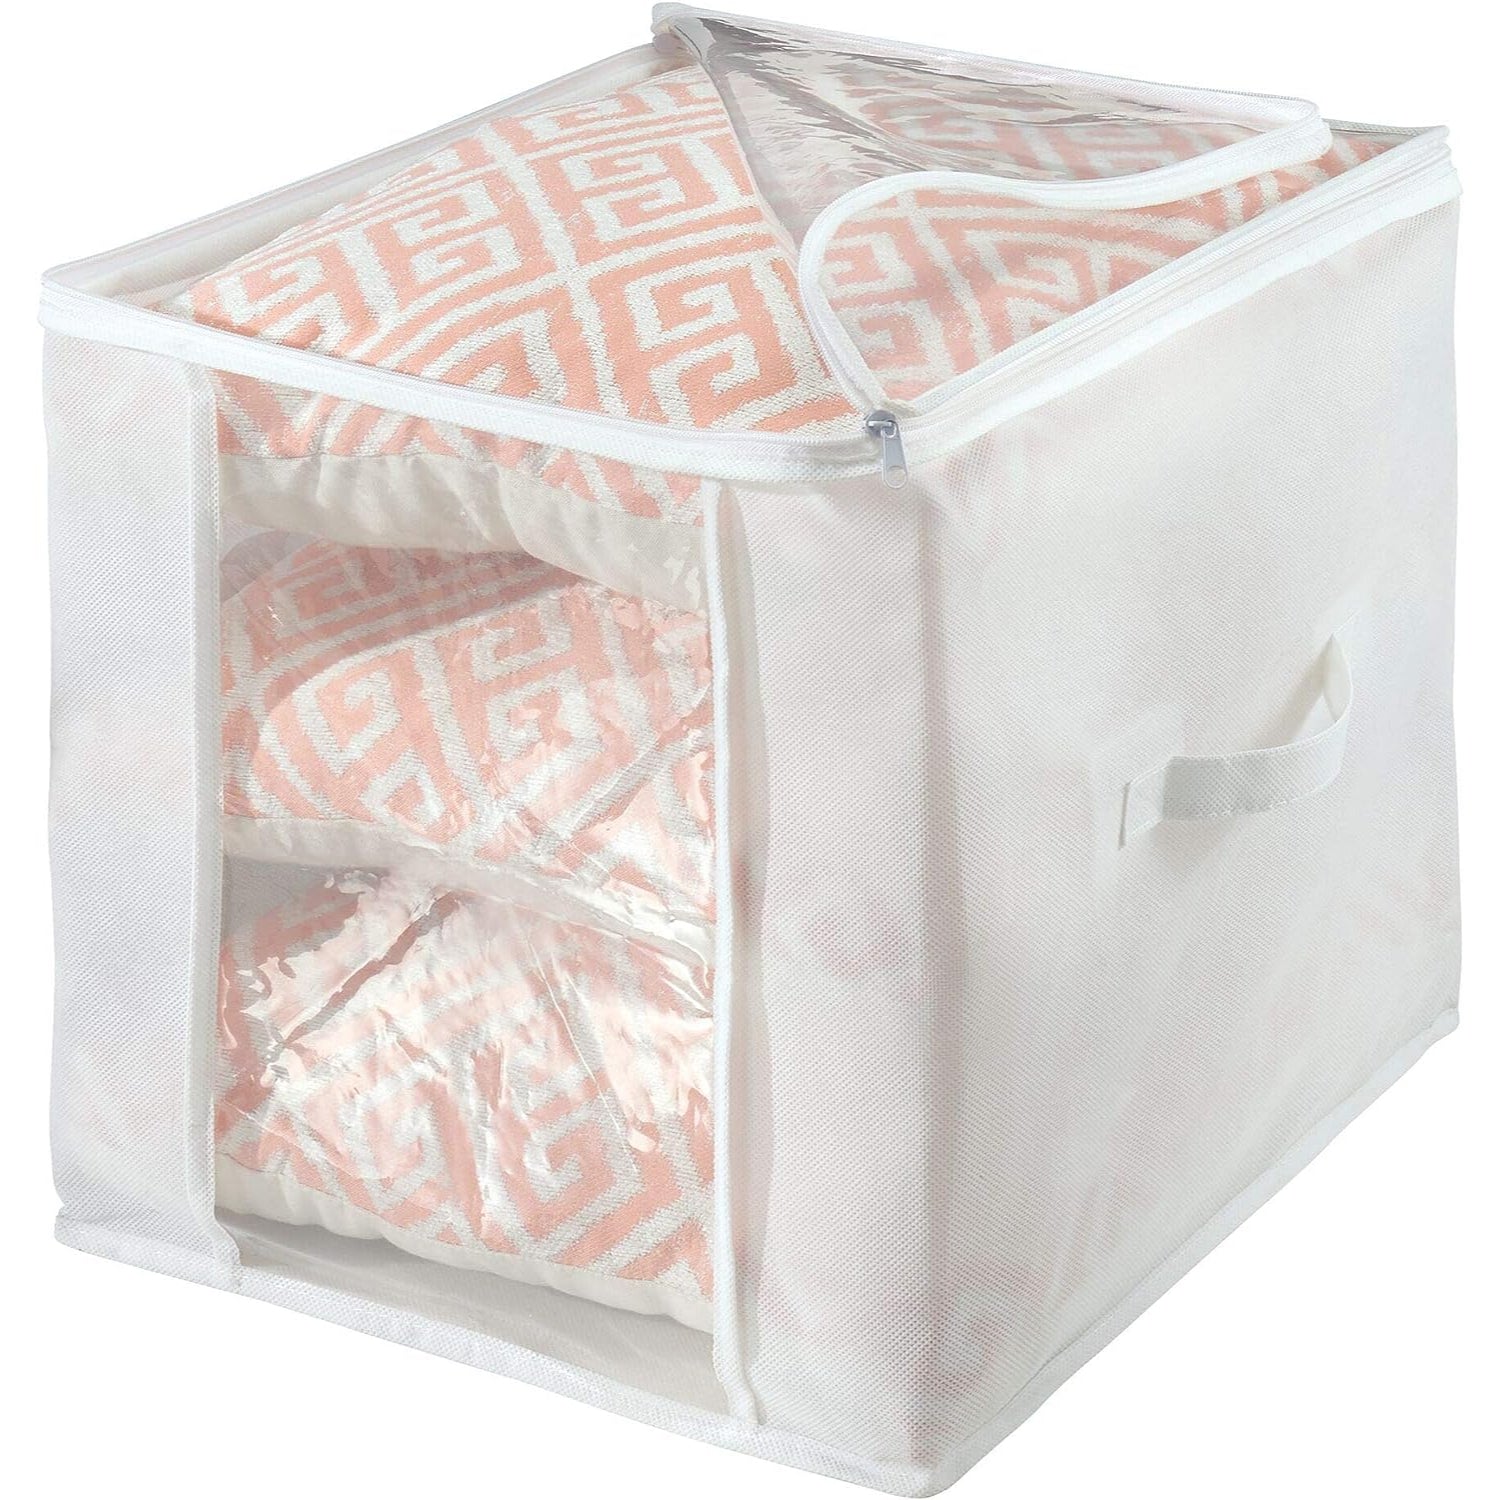 iDesign InterDesign Non-Woven Fabric Foldable Cubes for Clothing, Pack of 2, 16'' x 16'' x 16''